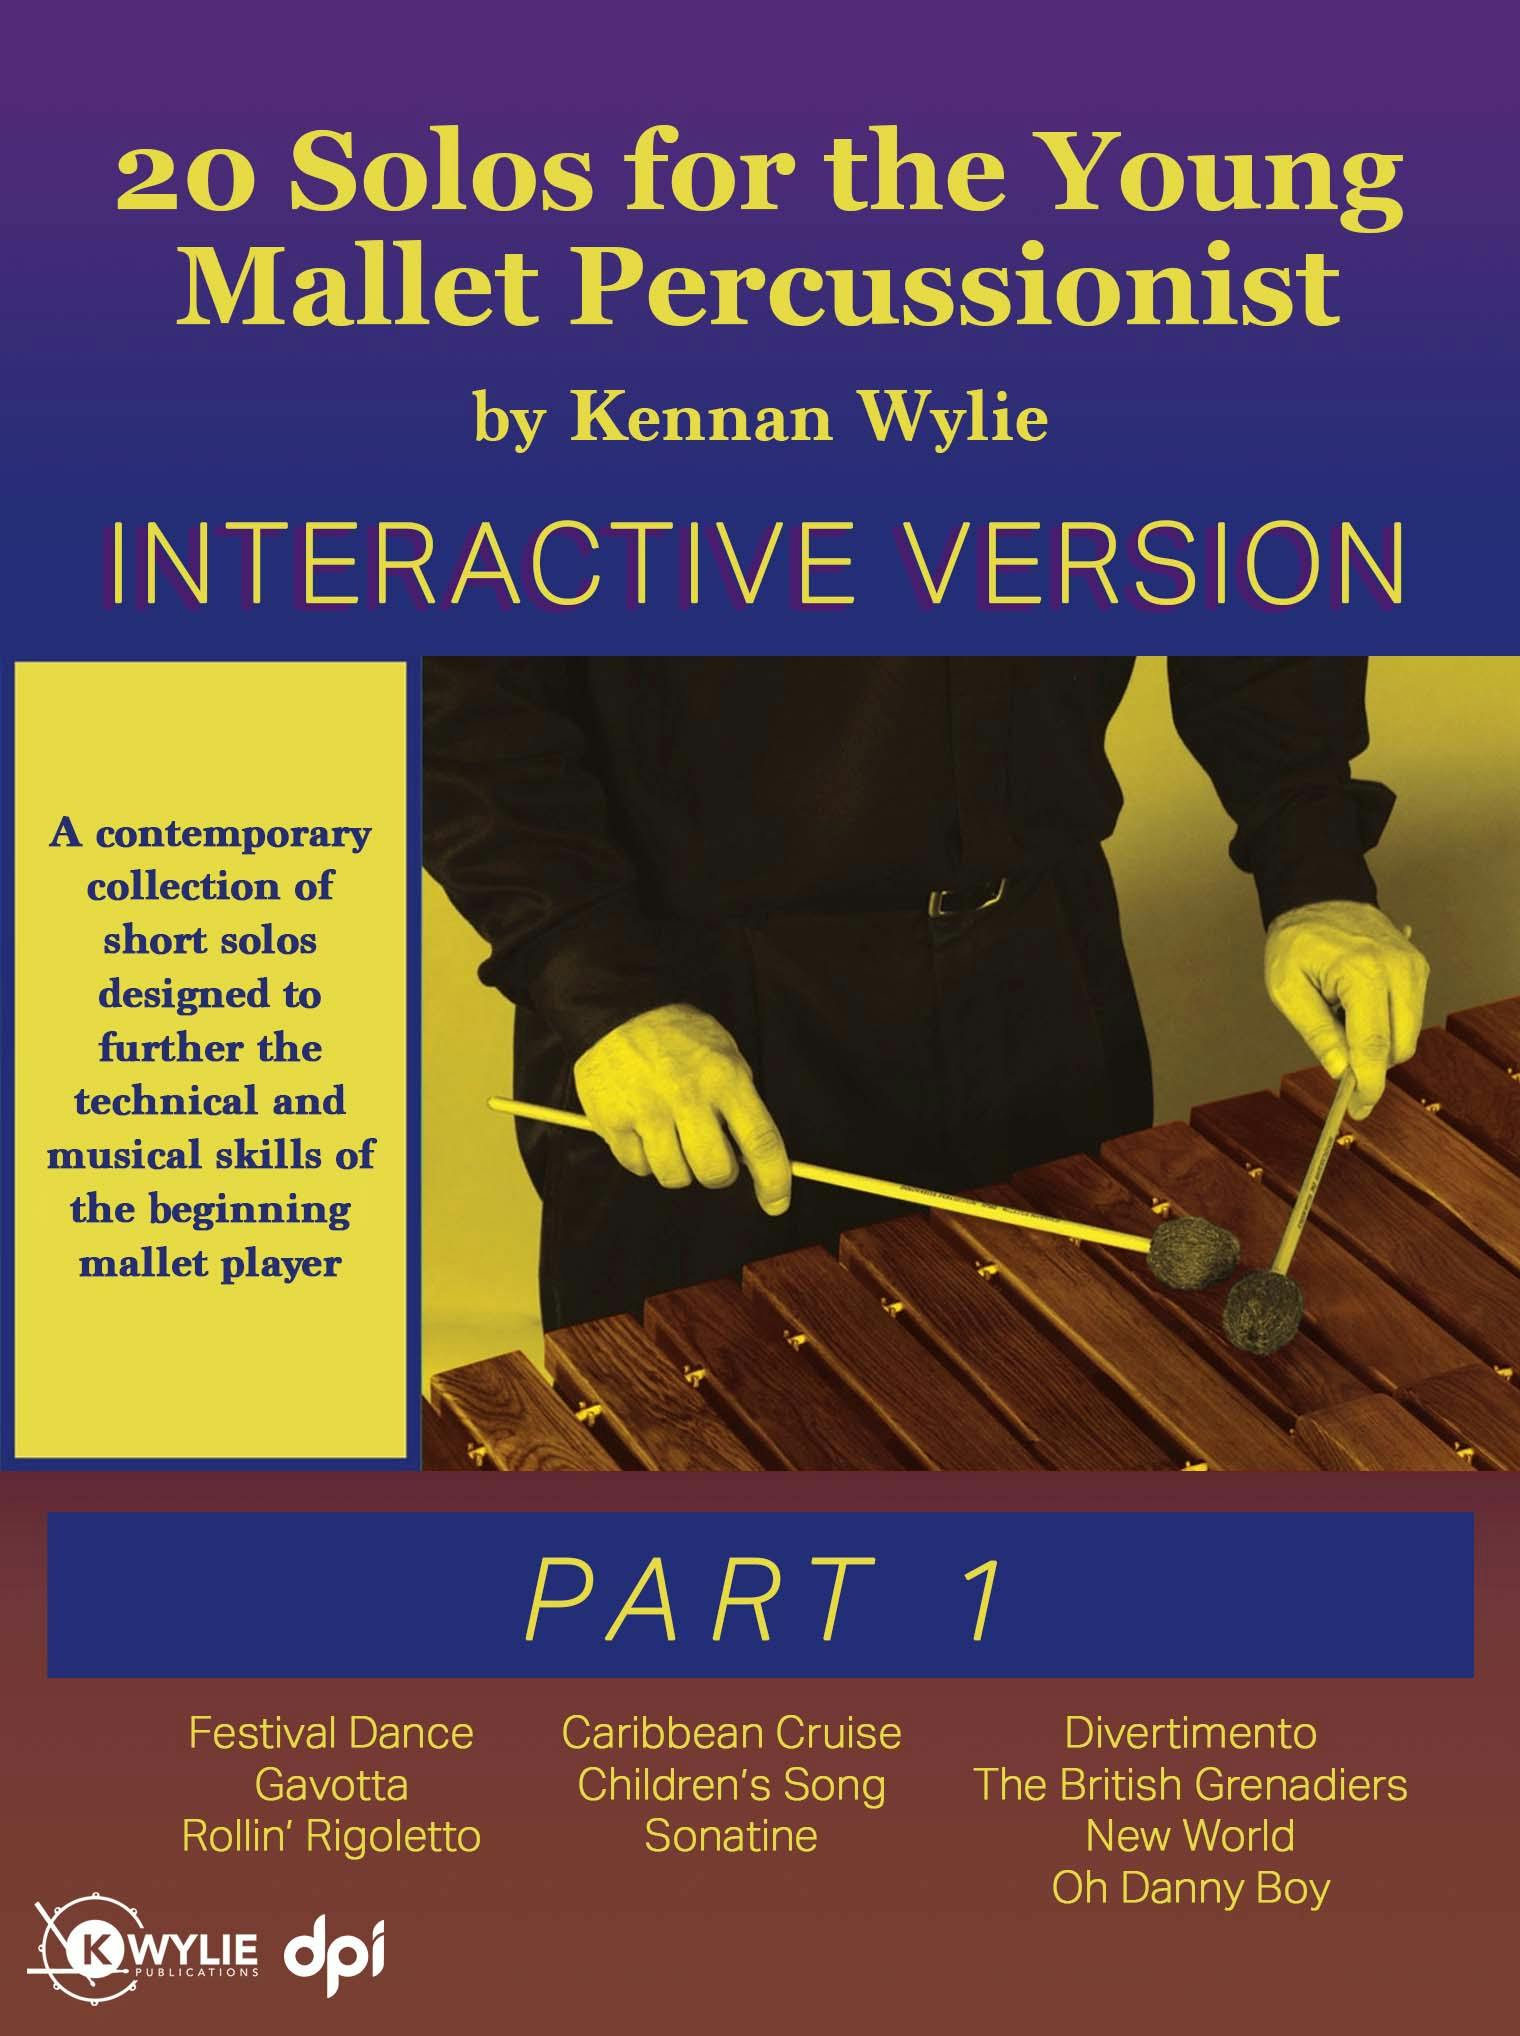 20 Solos for the Young Mallet Percussionist - Part 1 cover